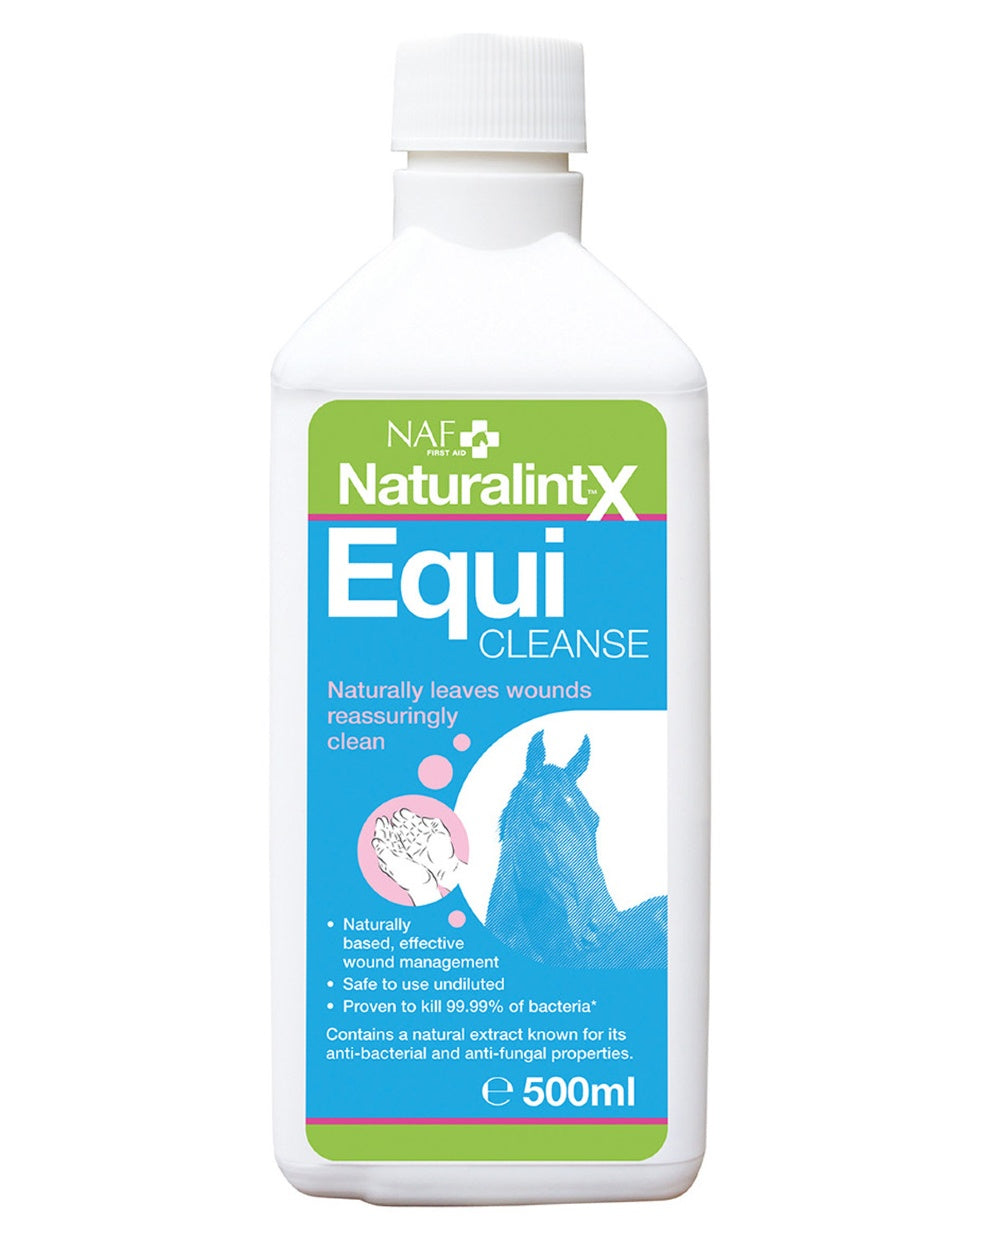 NAF Naturalintx Equicleanse on white background